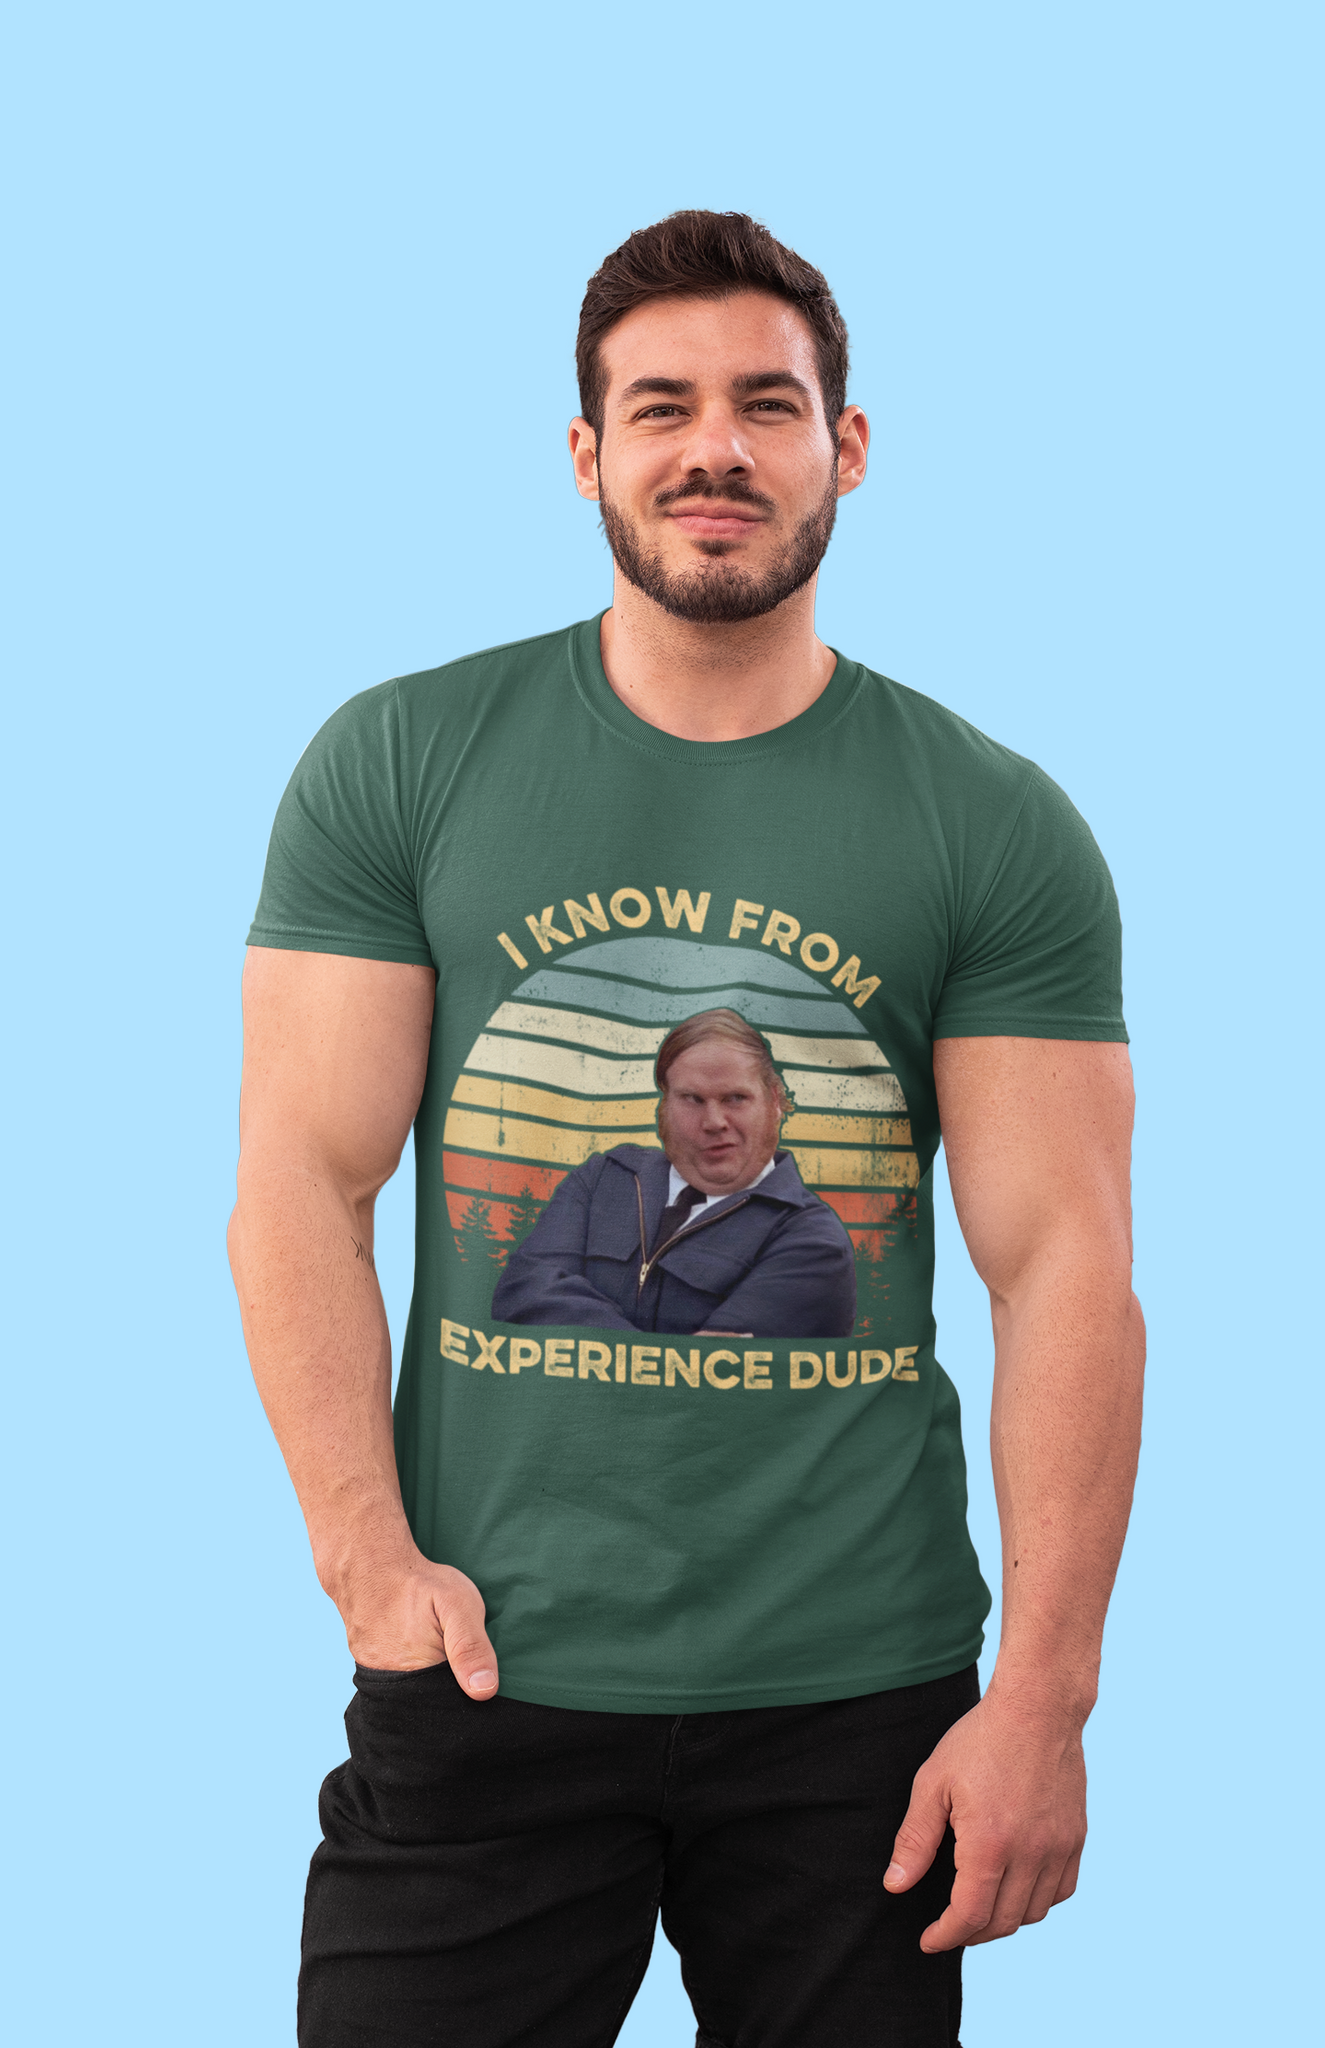 Billy Madison Vintage T Shirt, I Know From Experience Dude Tshirt, Bus Driver T Shirt